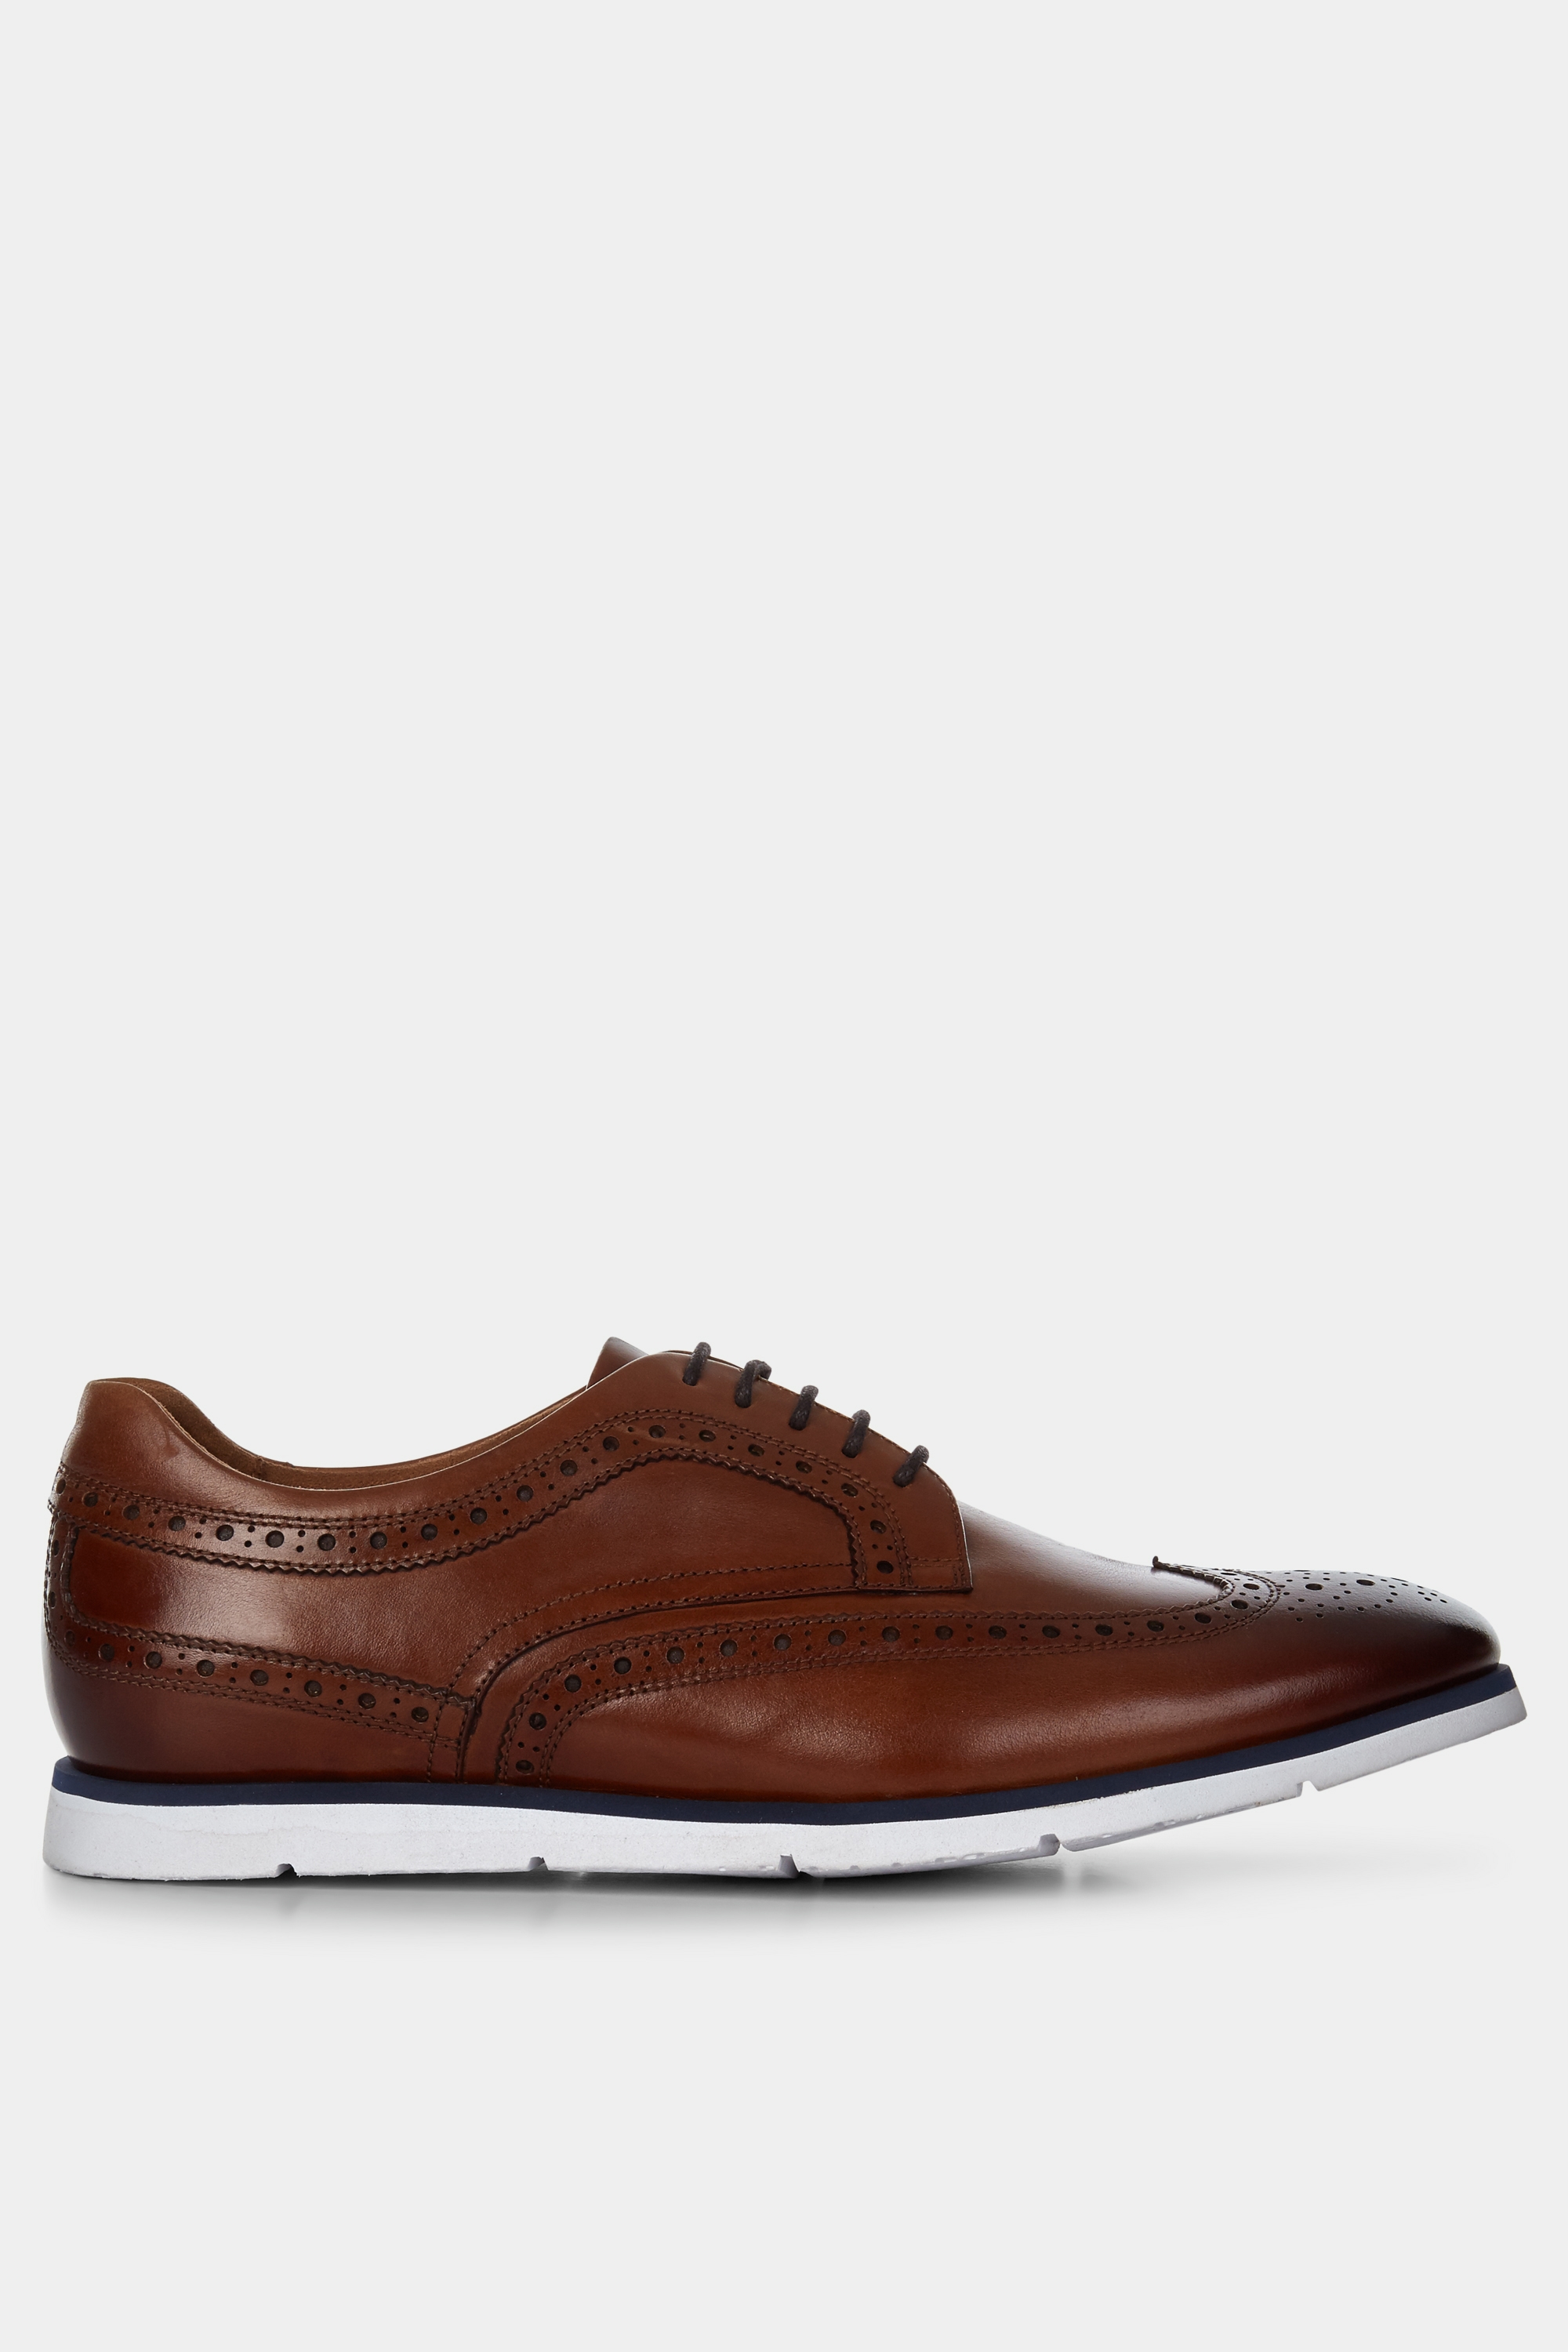 black brogues with white sole